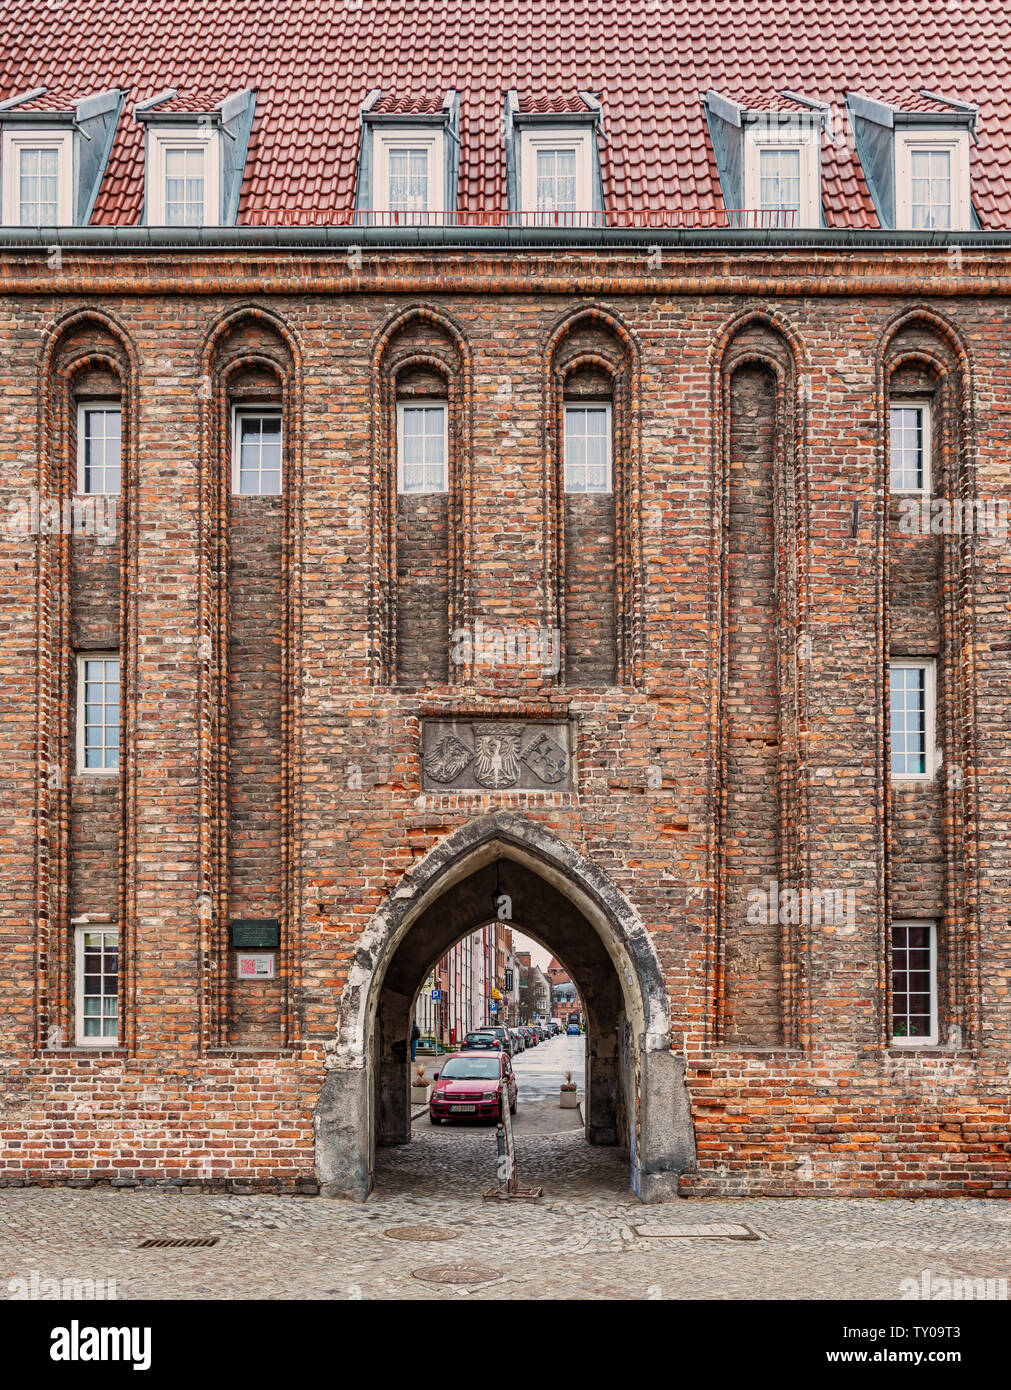 Gdansk, Poland – Feb 14, 2019: The Mariacka Gate building facade located at the promenade at Motlawa River in old town district of Gdansk, Poland. Stock Photo